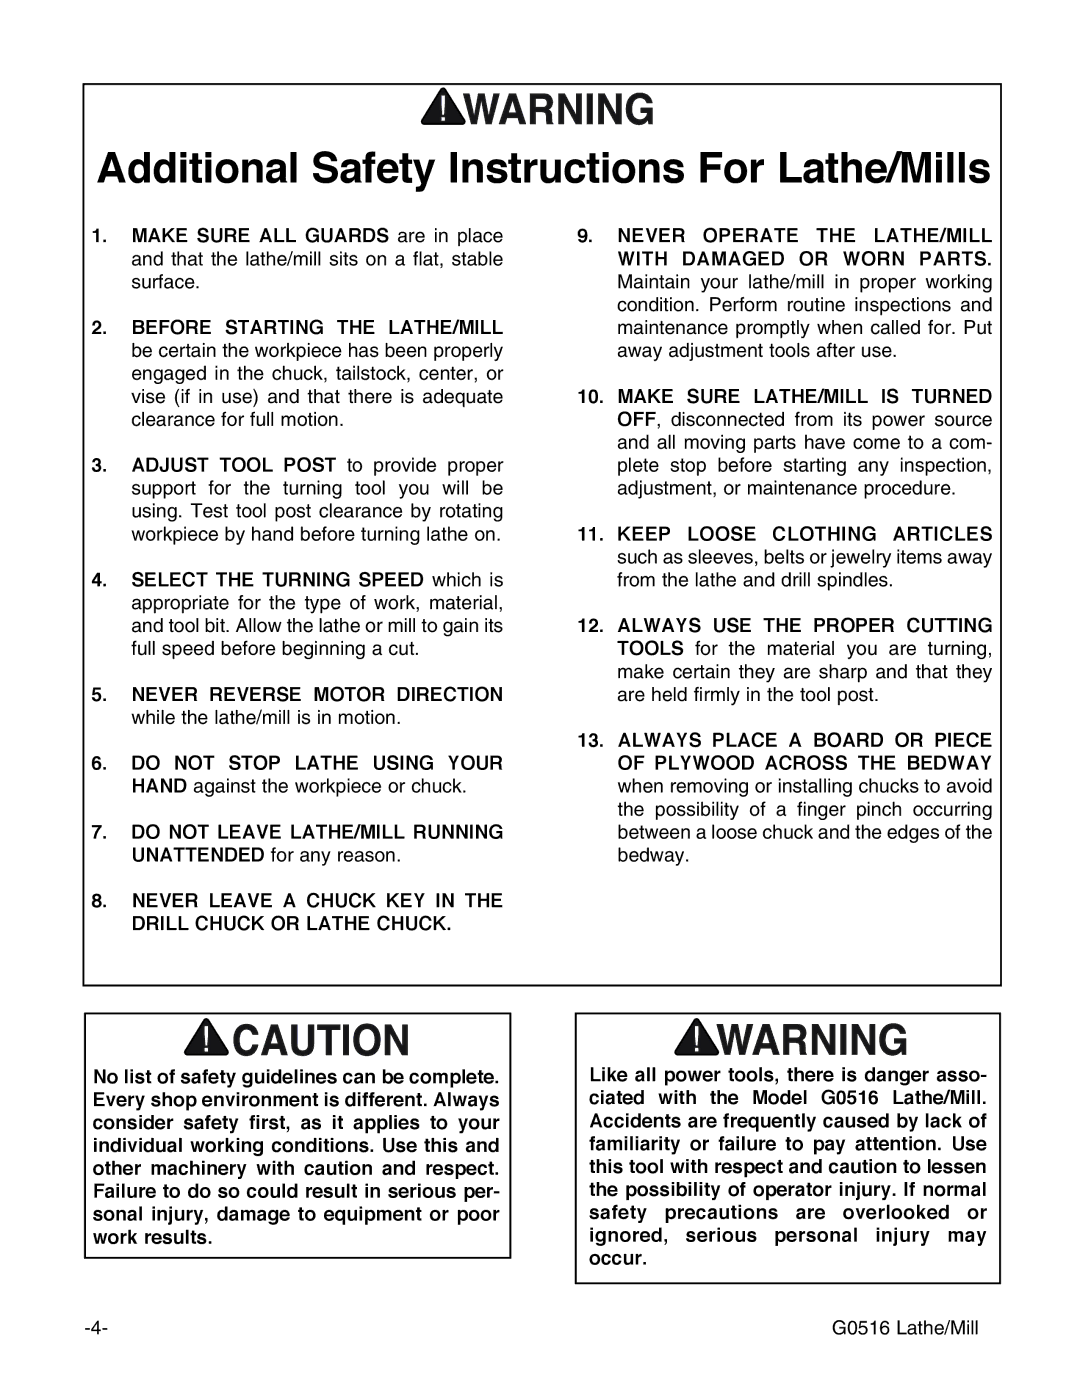 Grizzly G0516 instruction manual Additional Safety Instructions For Lathe/Mills 